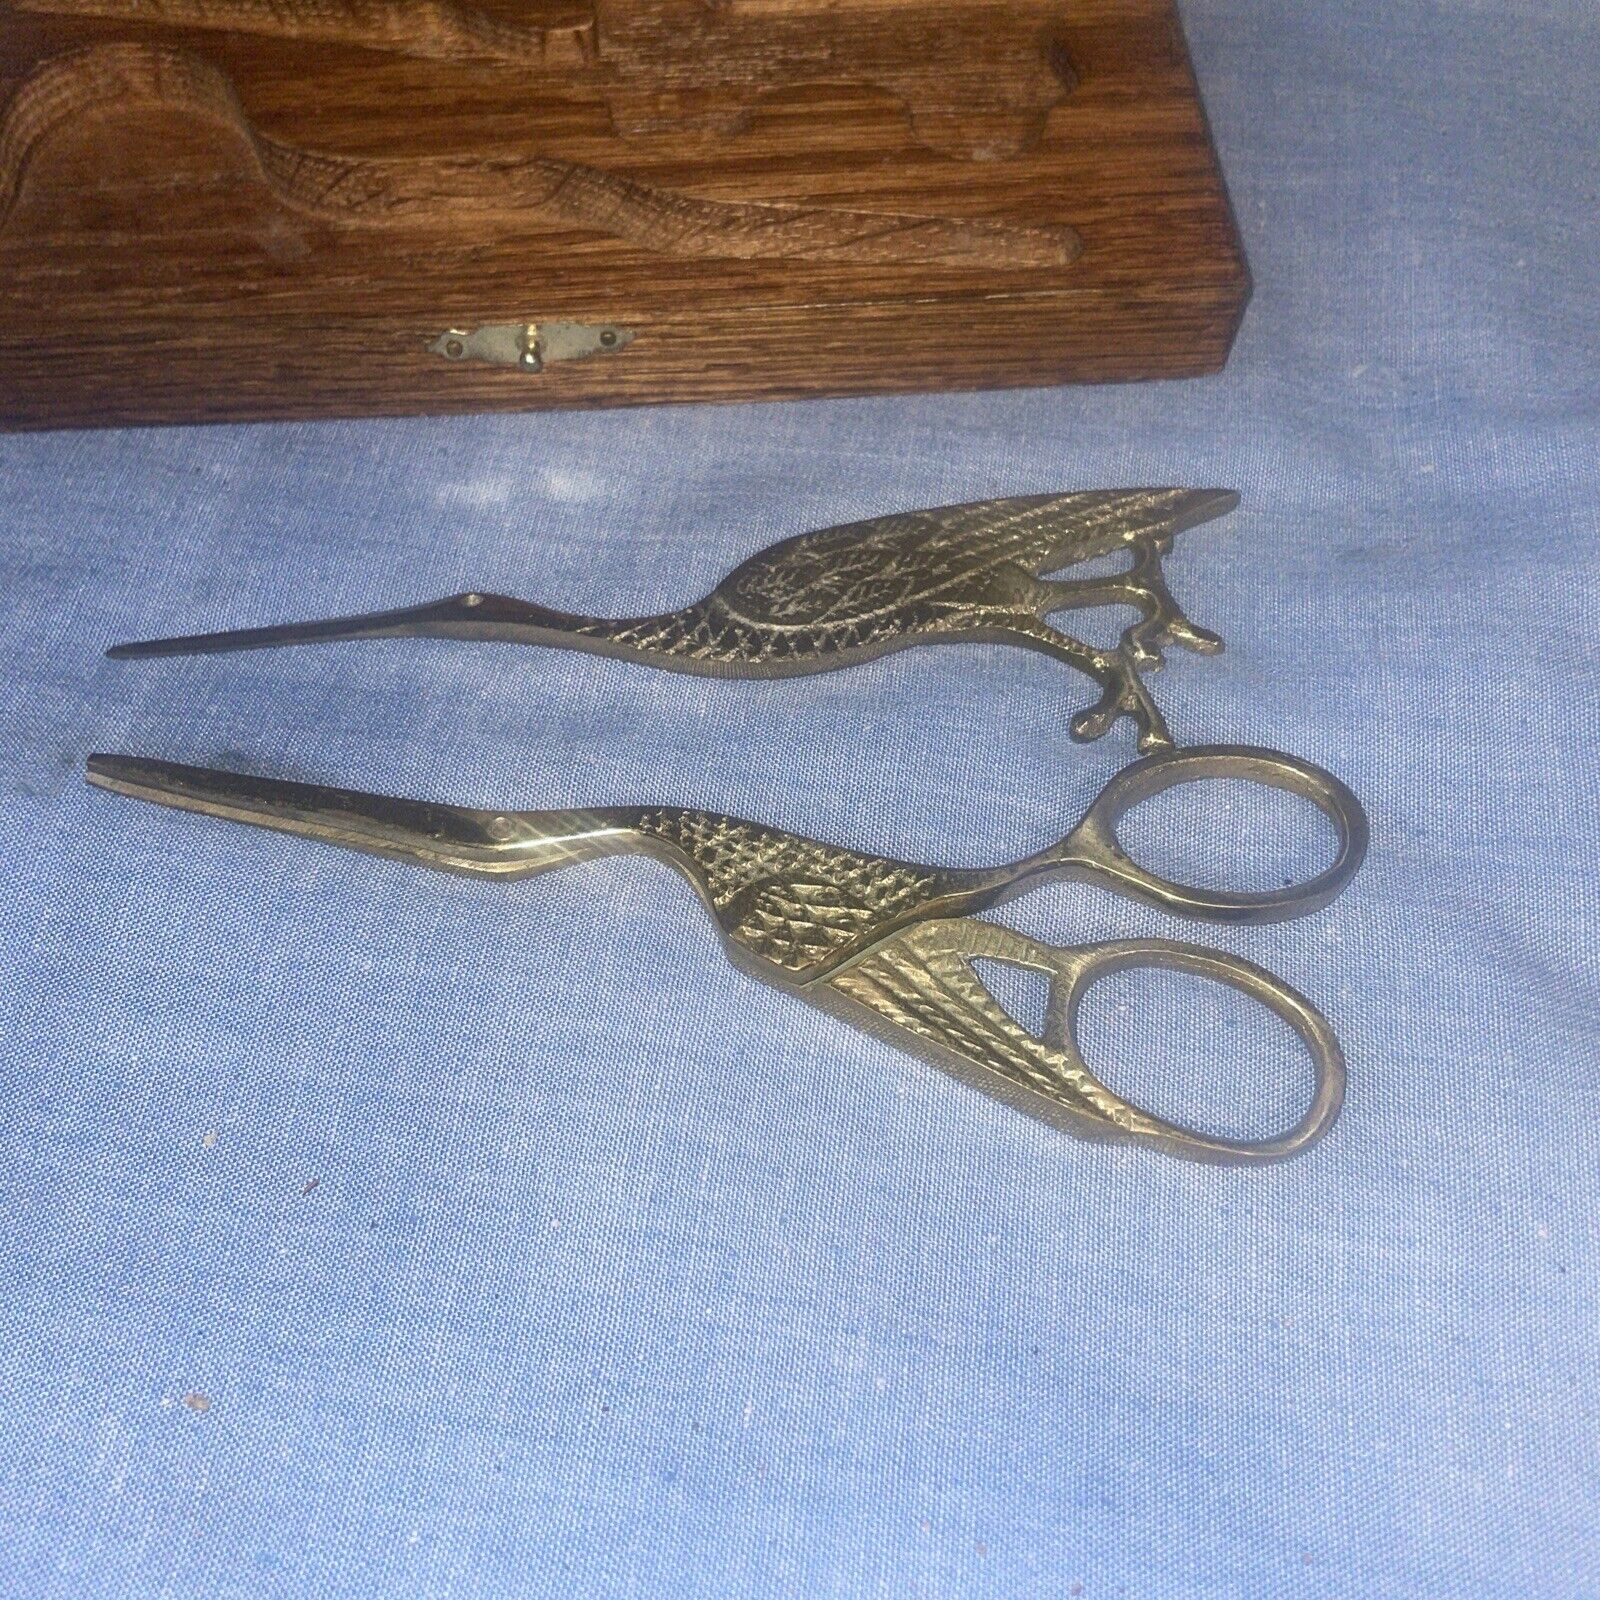 Rare unusual vintage/antique stork scissors and punch in wooden box